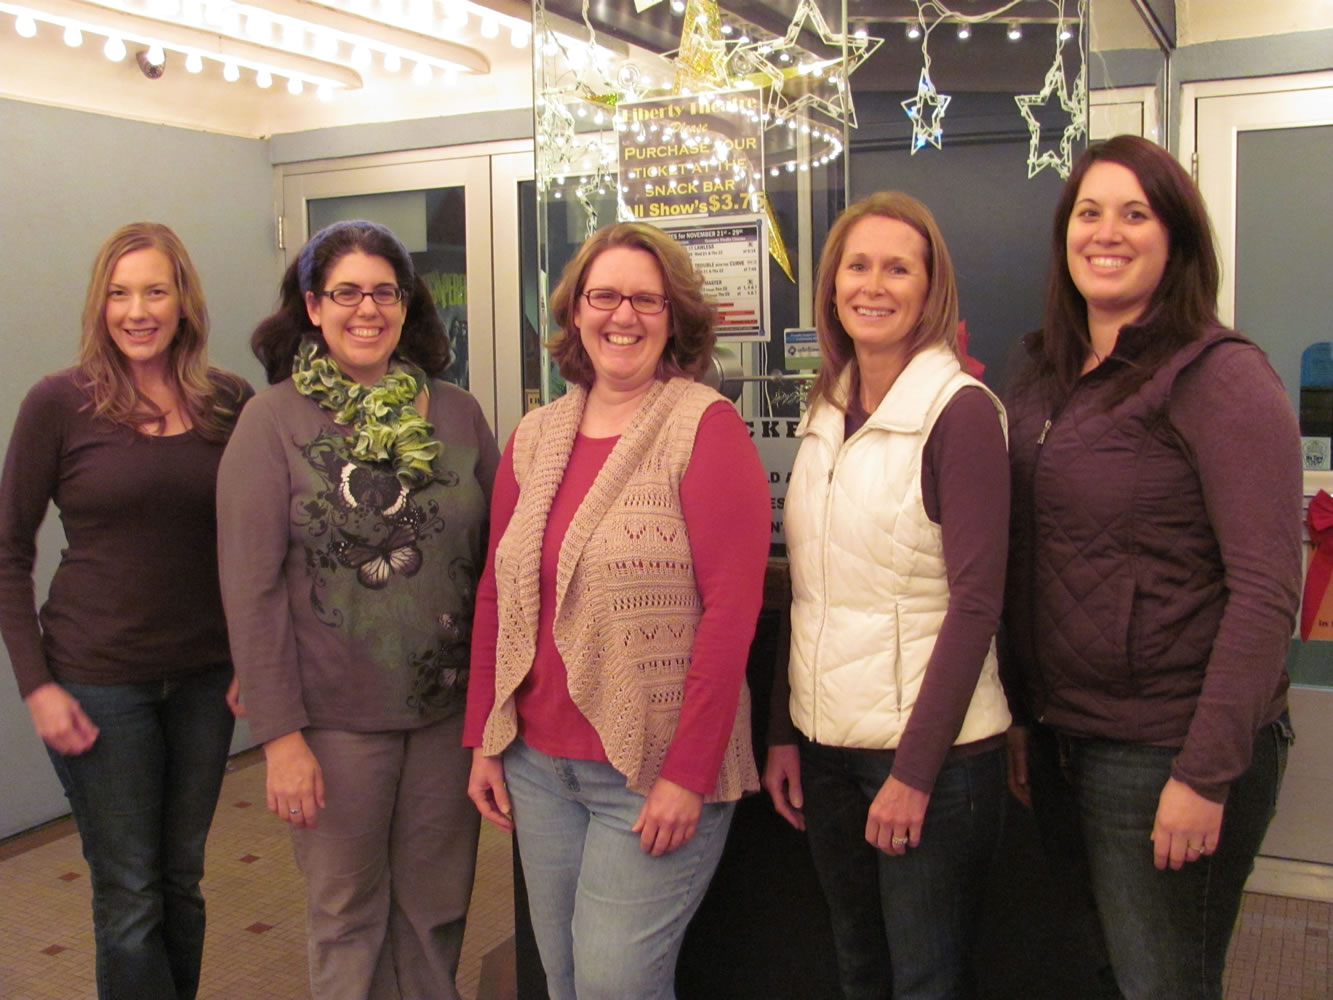 The Camas Movie Club includes Stacey Kim, Laurinda Reddig, Carissa Reid, Debra Thomas and Kristin Hakala (from left to right). Reid started the club as a Facebook page, because she loves movies and she wants to help promote the Liberty Theatre, in downtown Camas.